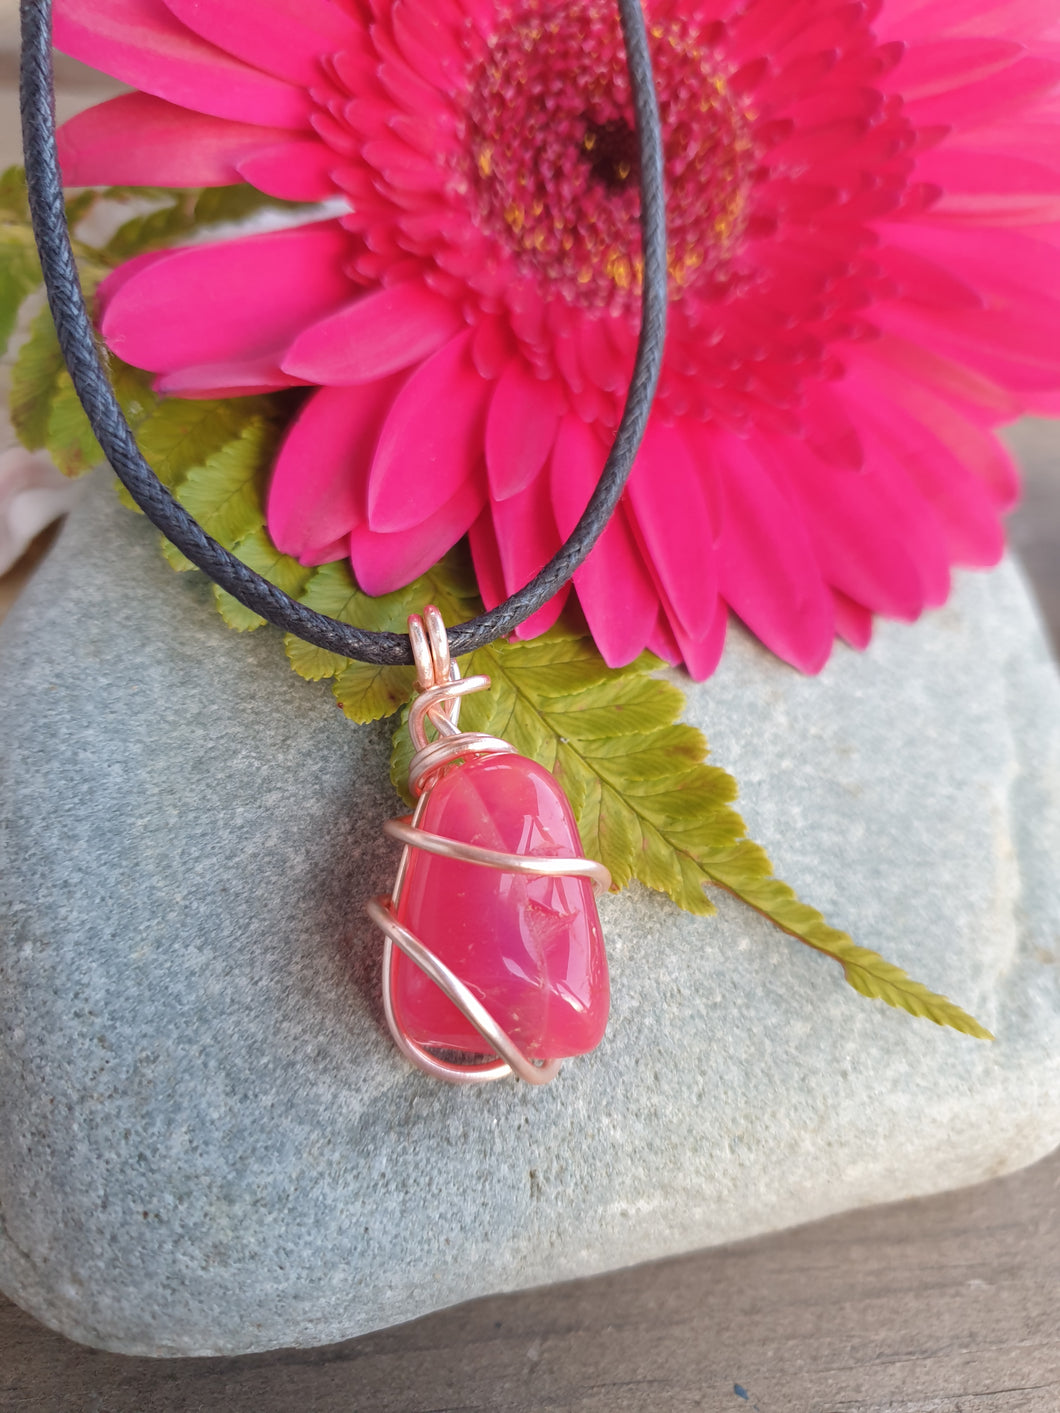 Pink agate pendant necklace